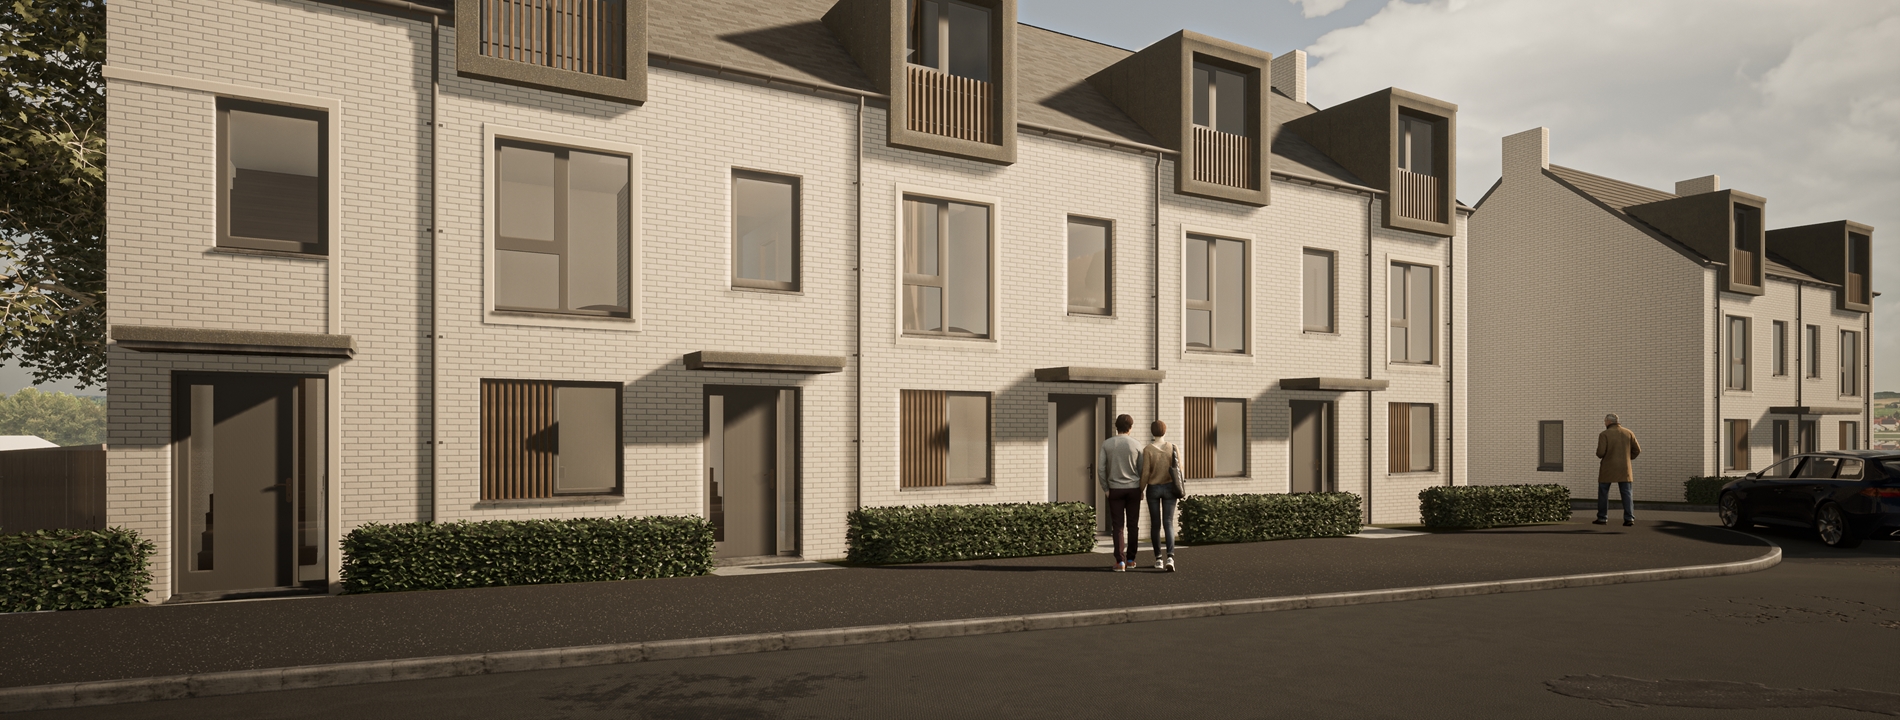 Render image showing a street scene of the Main Street development in Cleland.